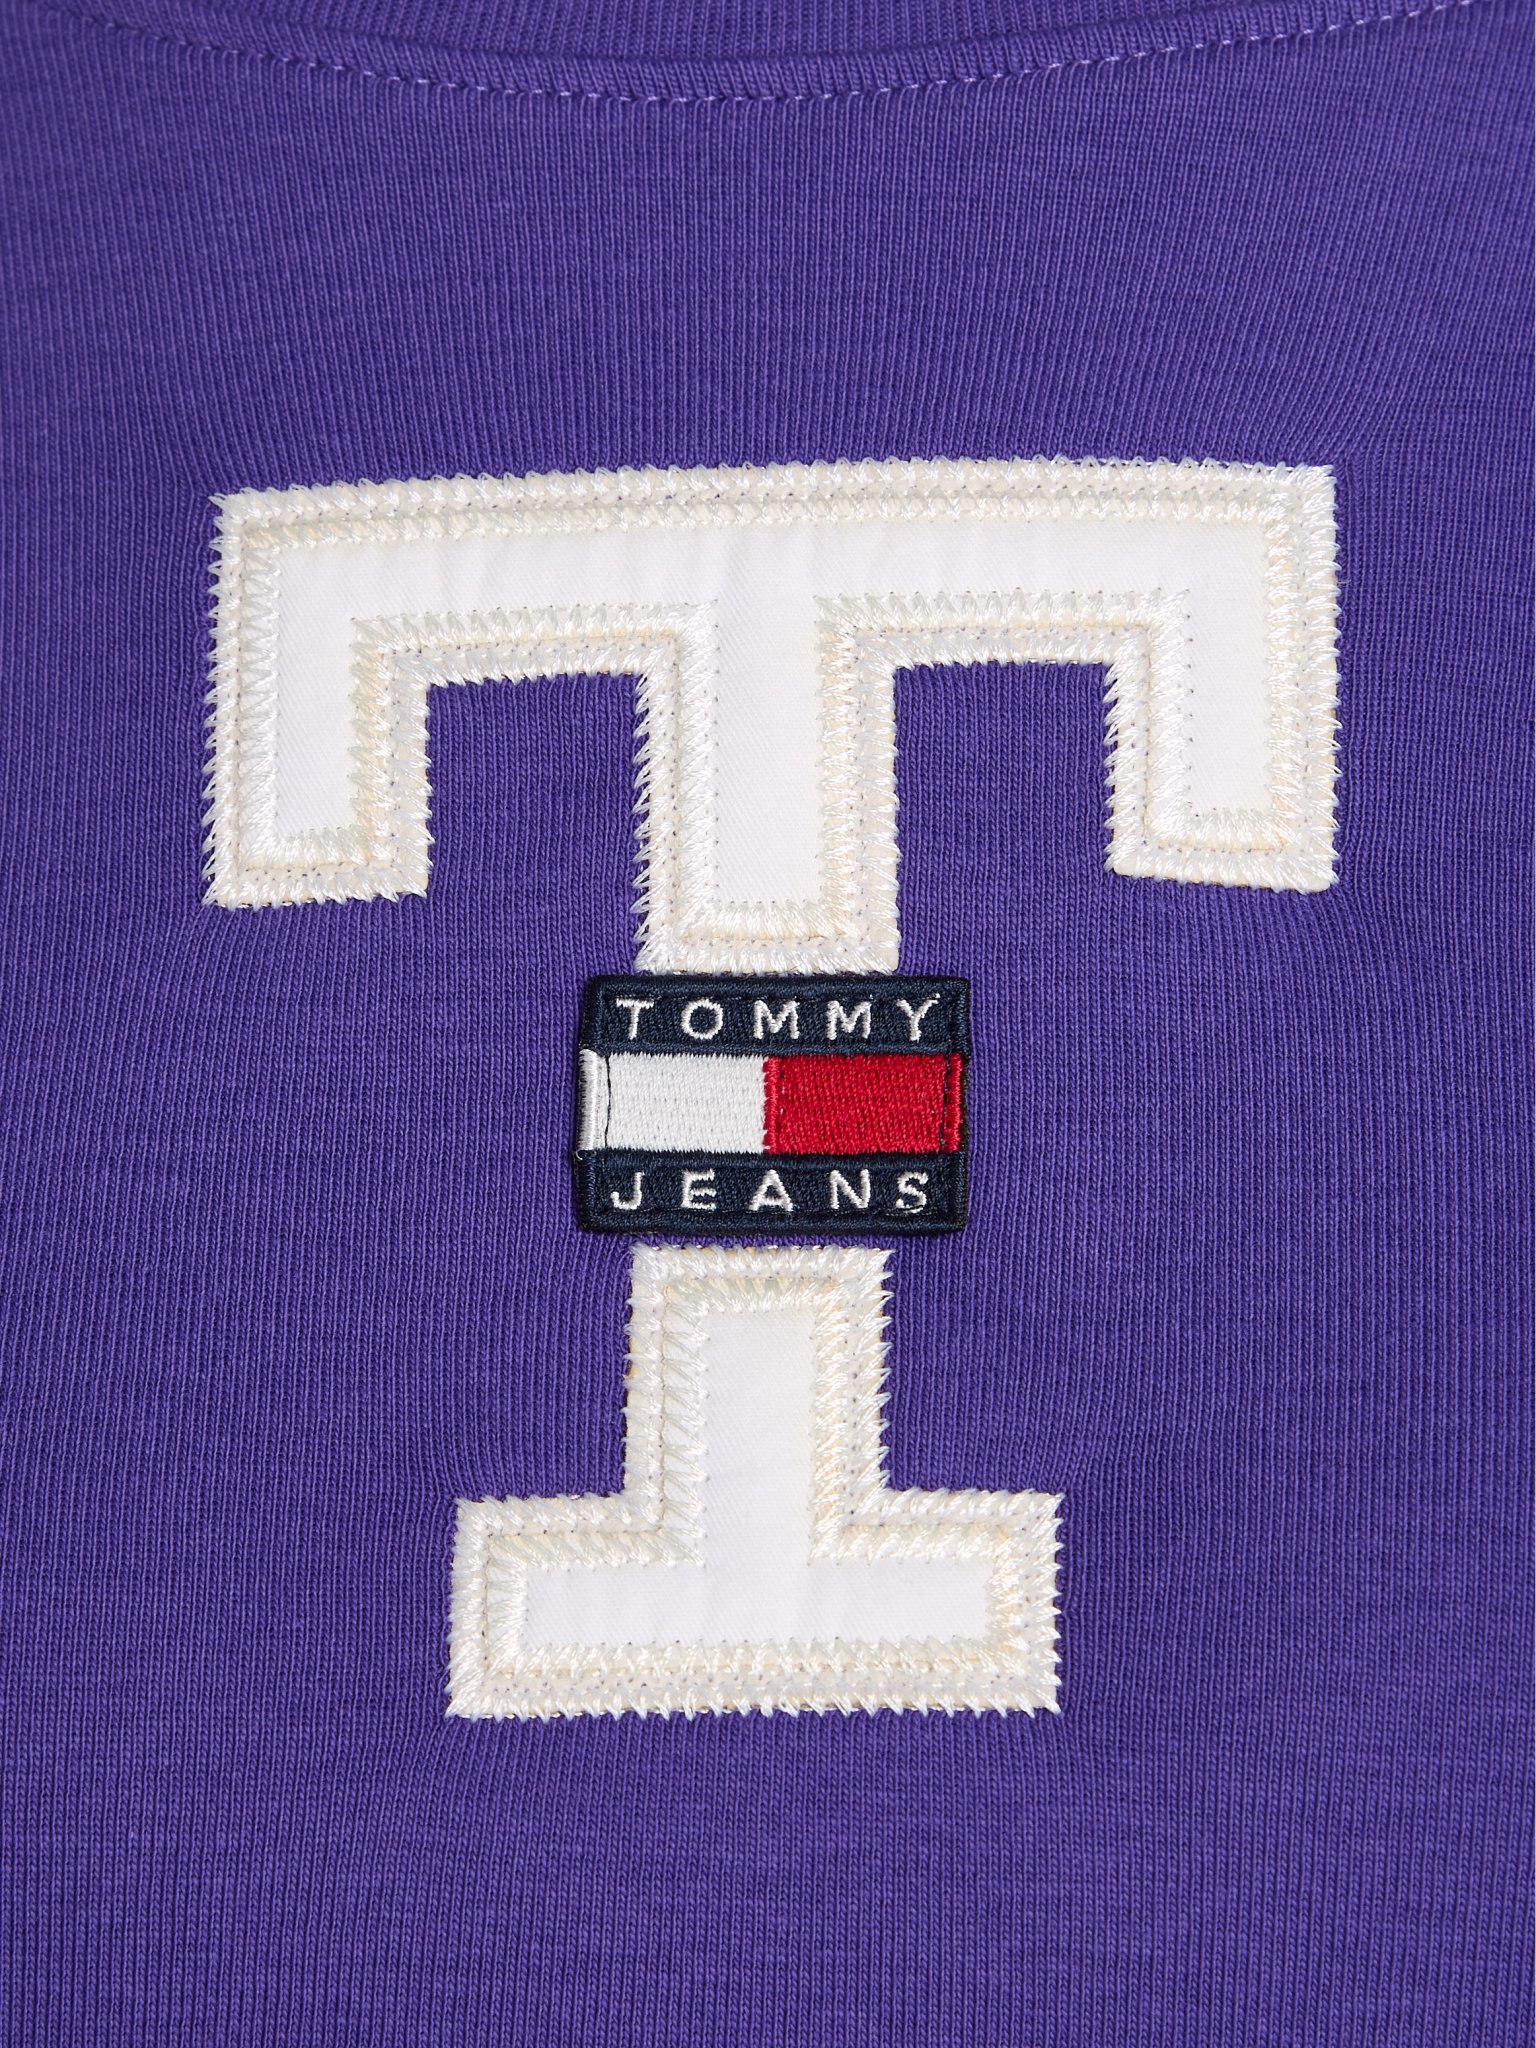 TOMMY JEANS Shirt 10704669